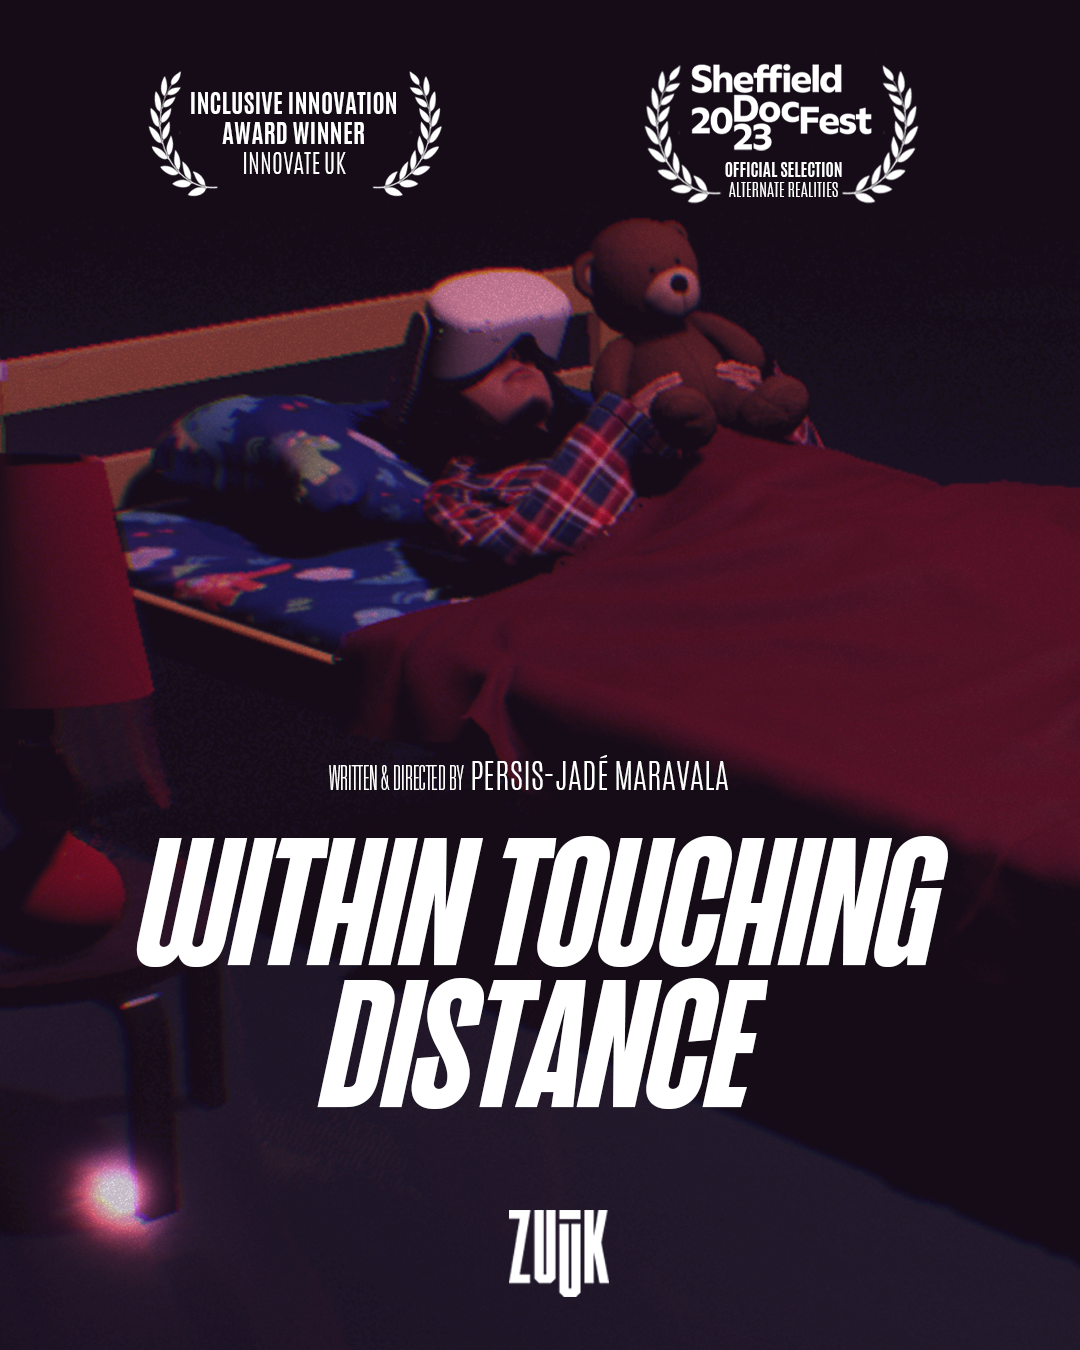 Within Touching Distance promo poster. A person lies in bed facing away from us, holding a teddy and wearing a VR headset.  Ahead of them a large moon